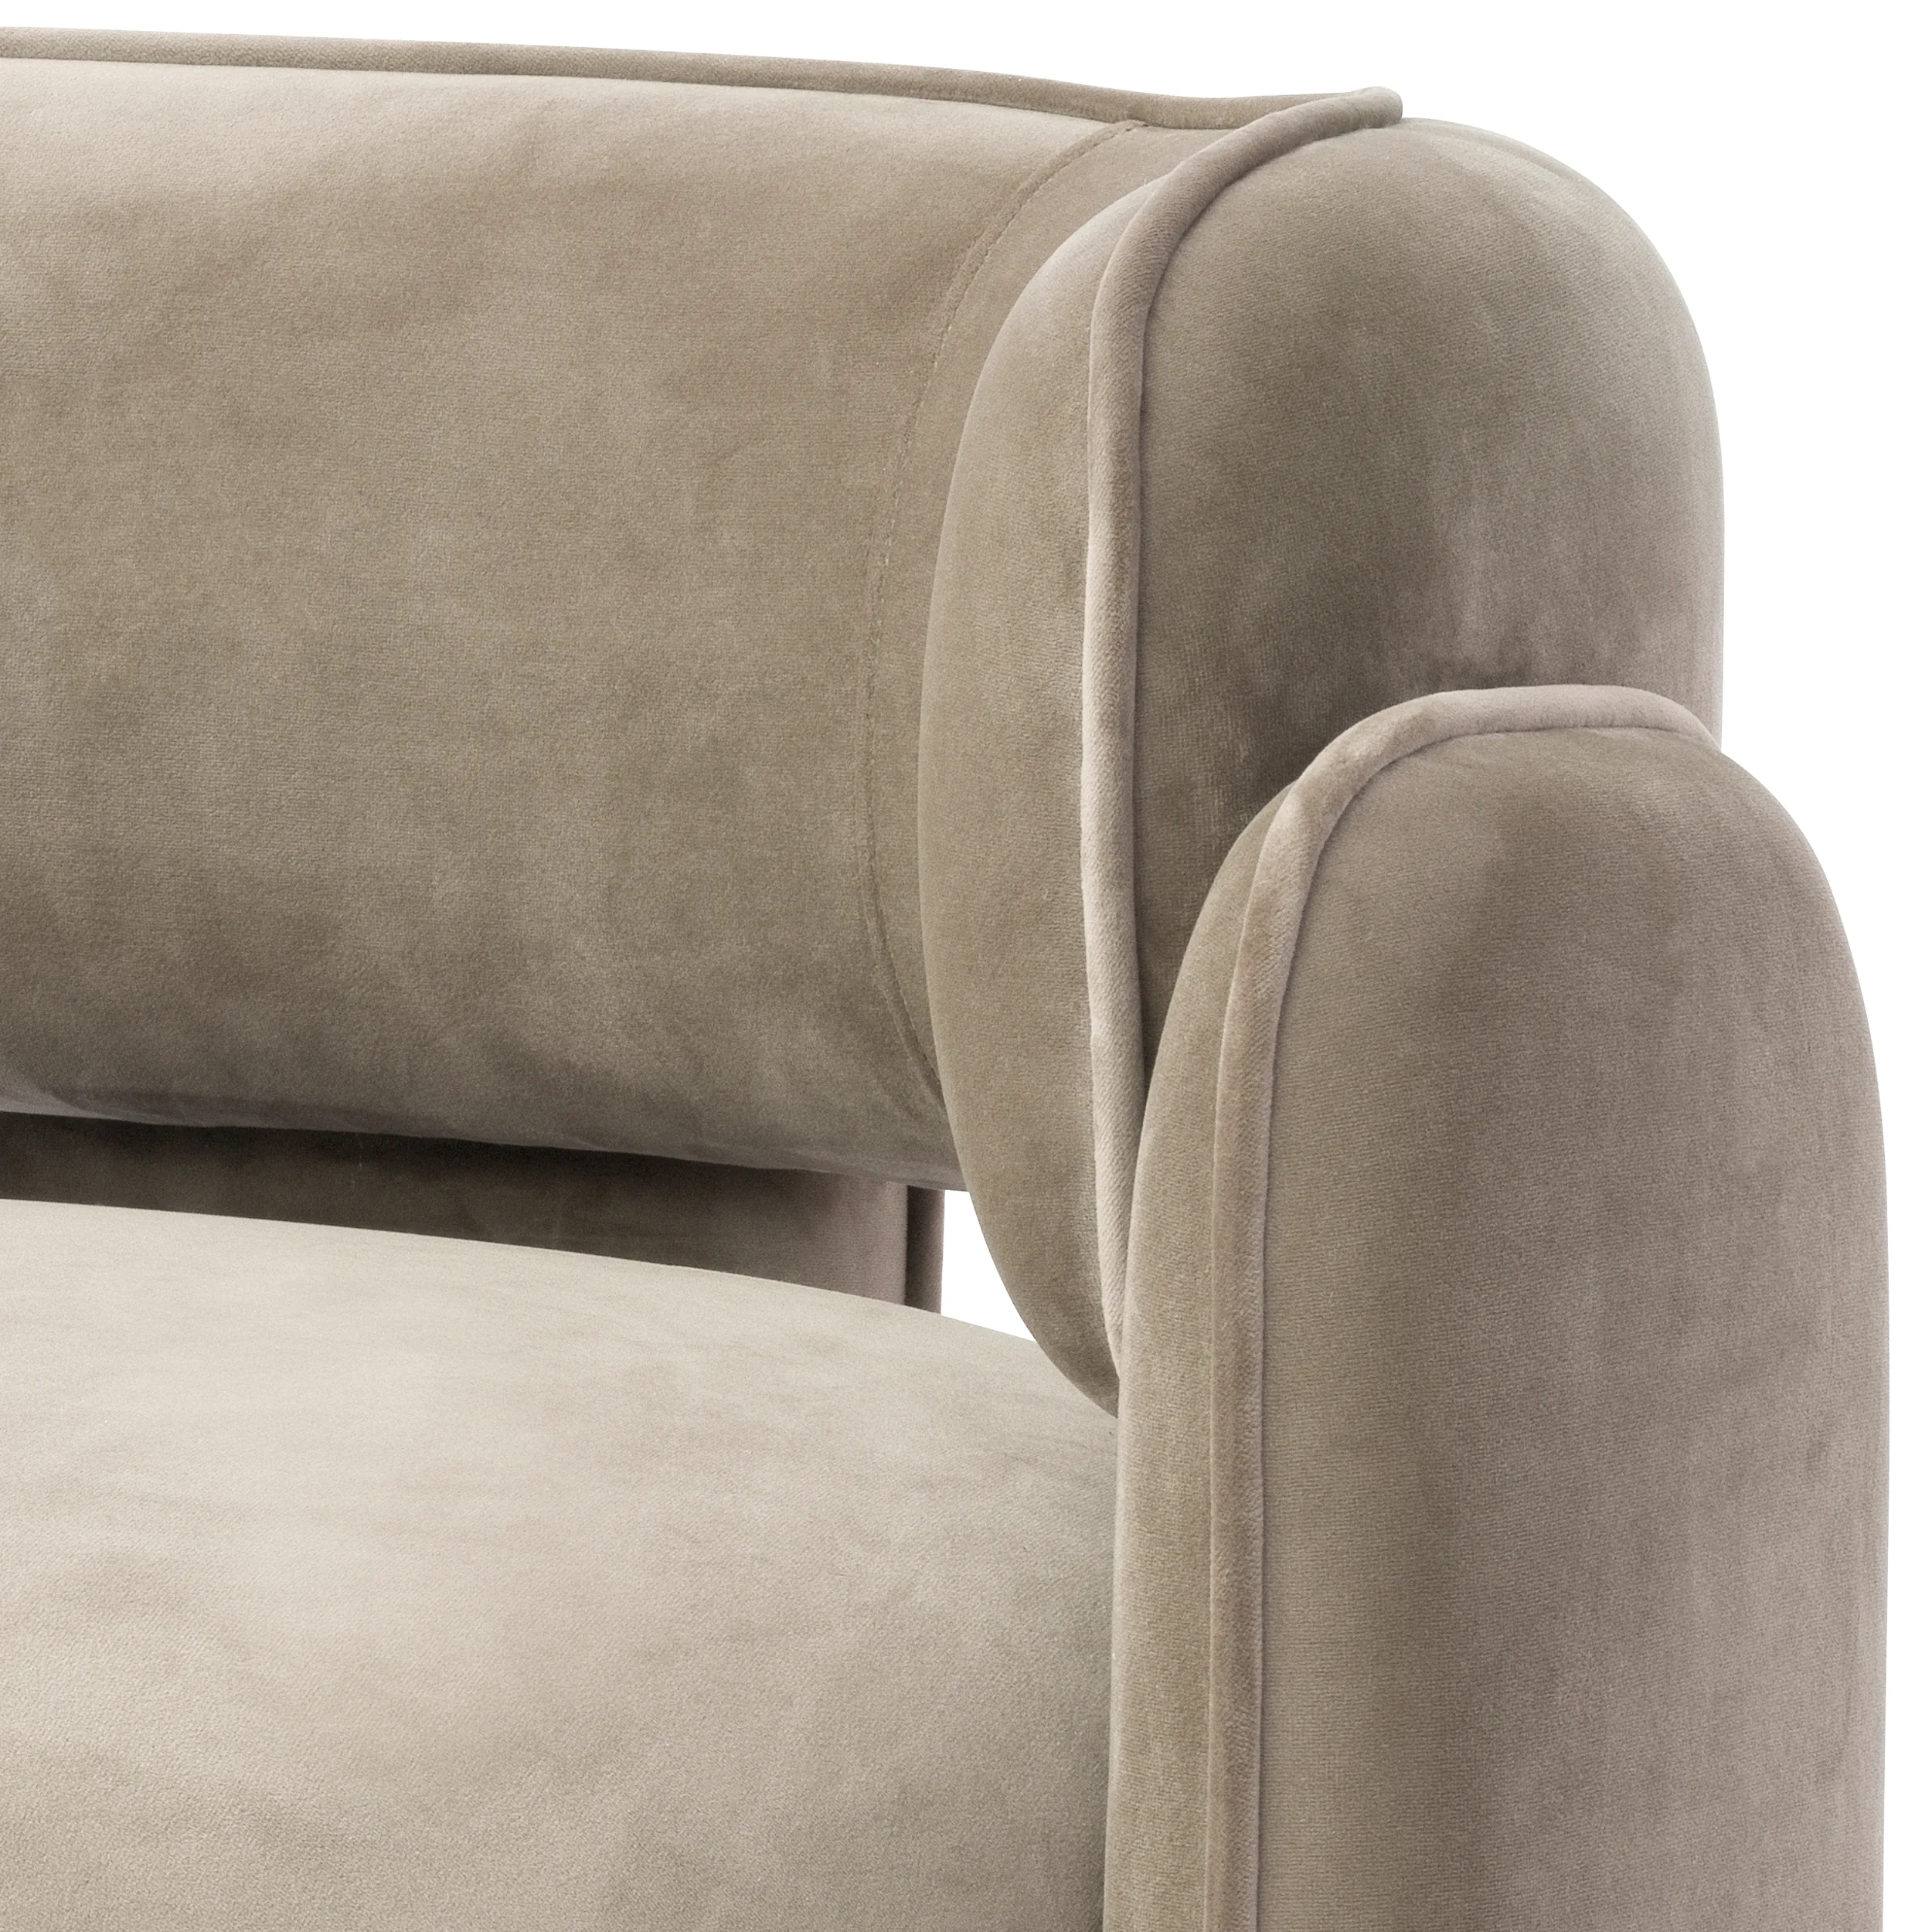 Chase armchair